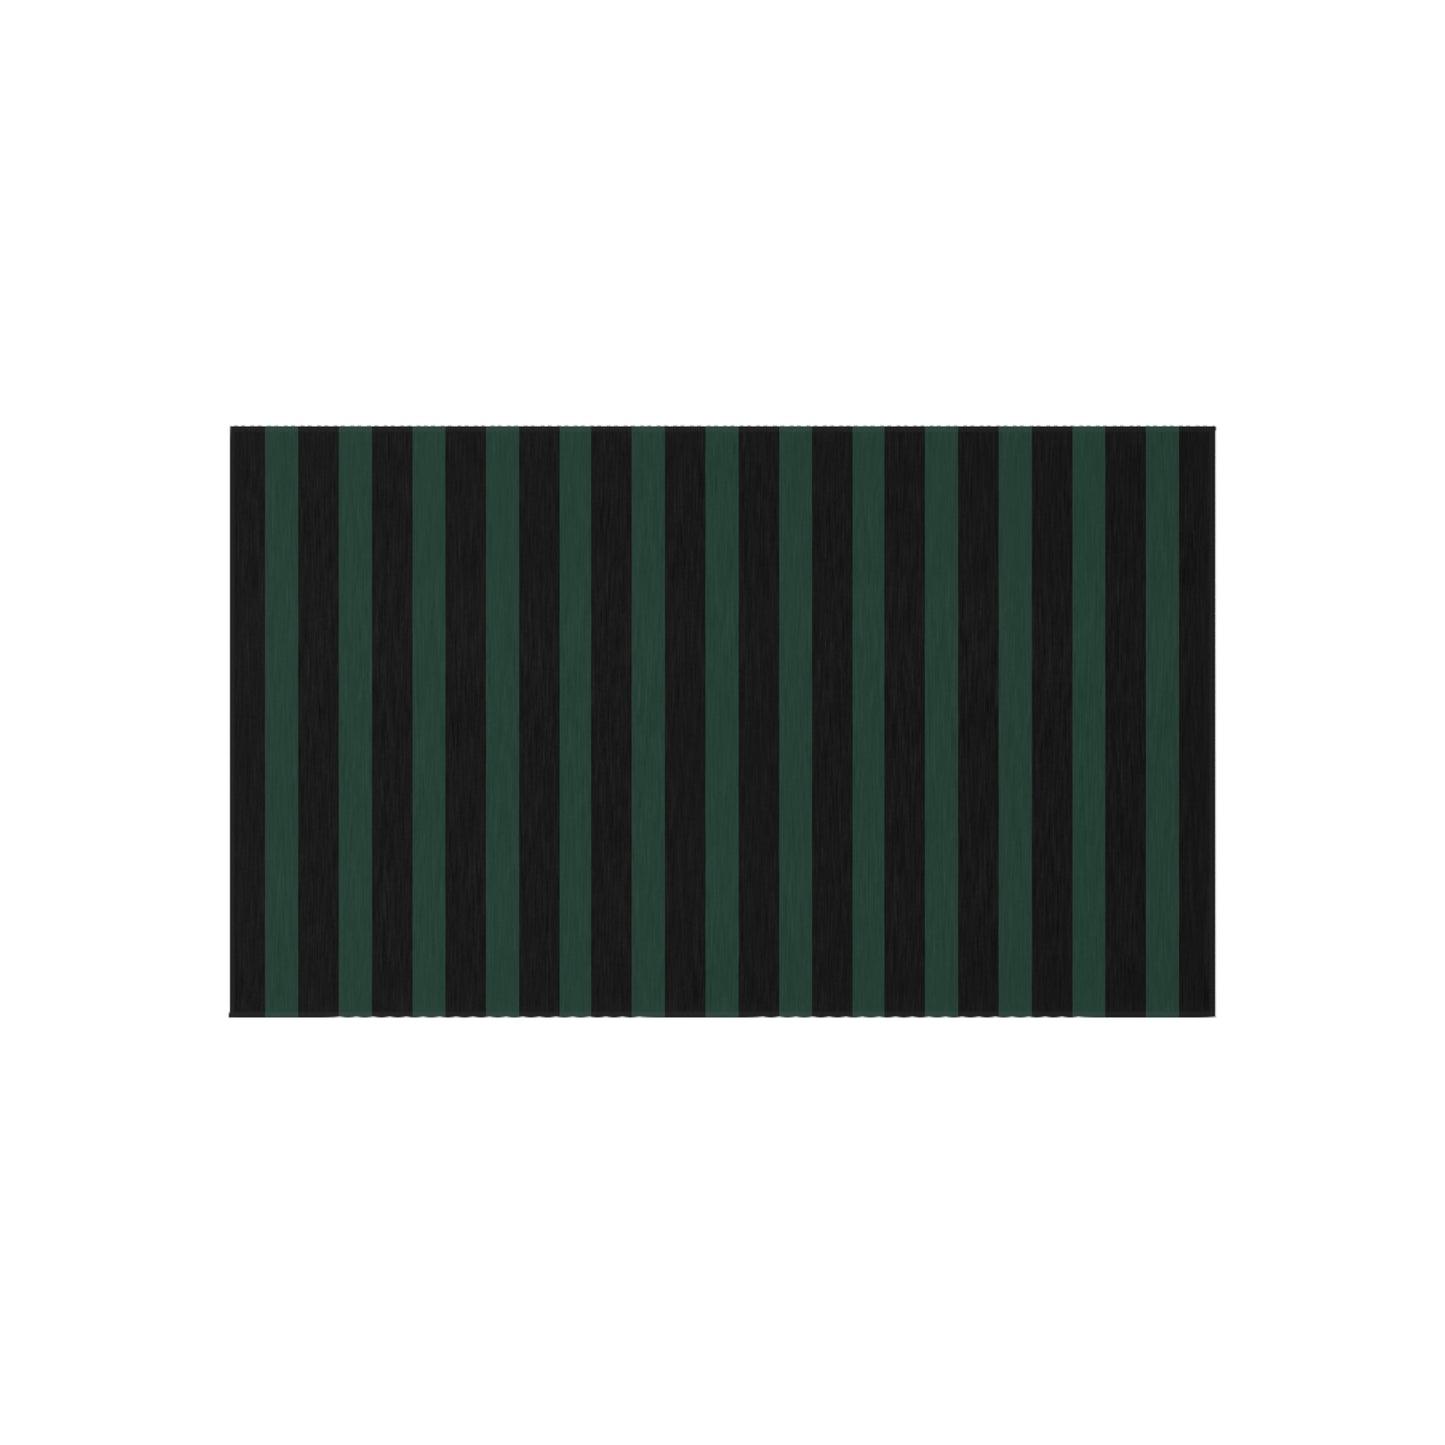 Black + Green Striped Outdoor Rug